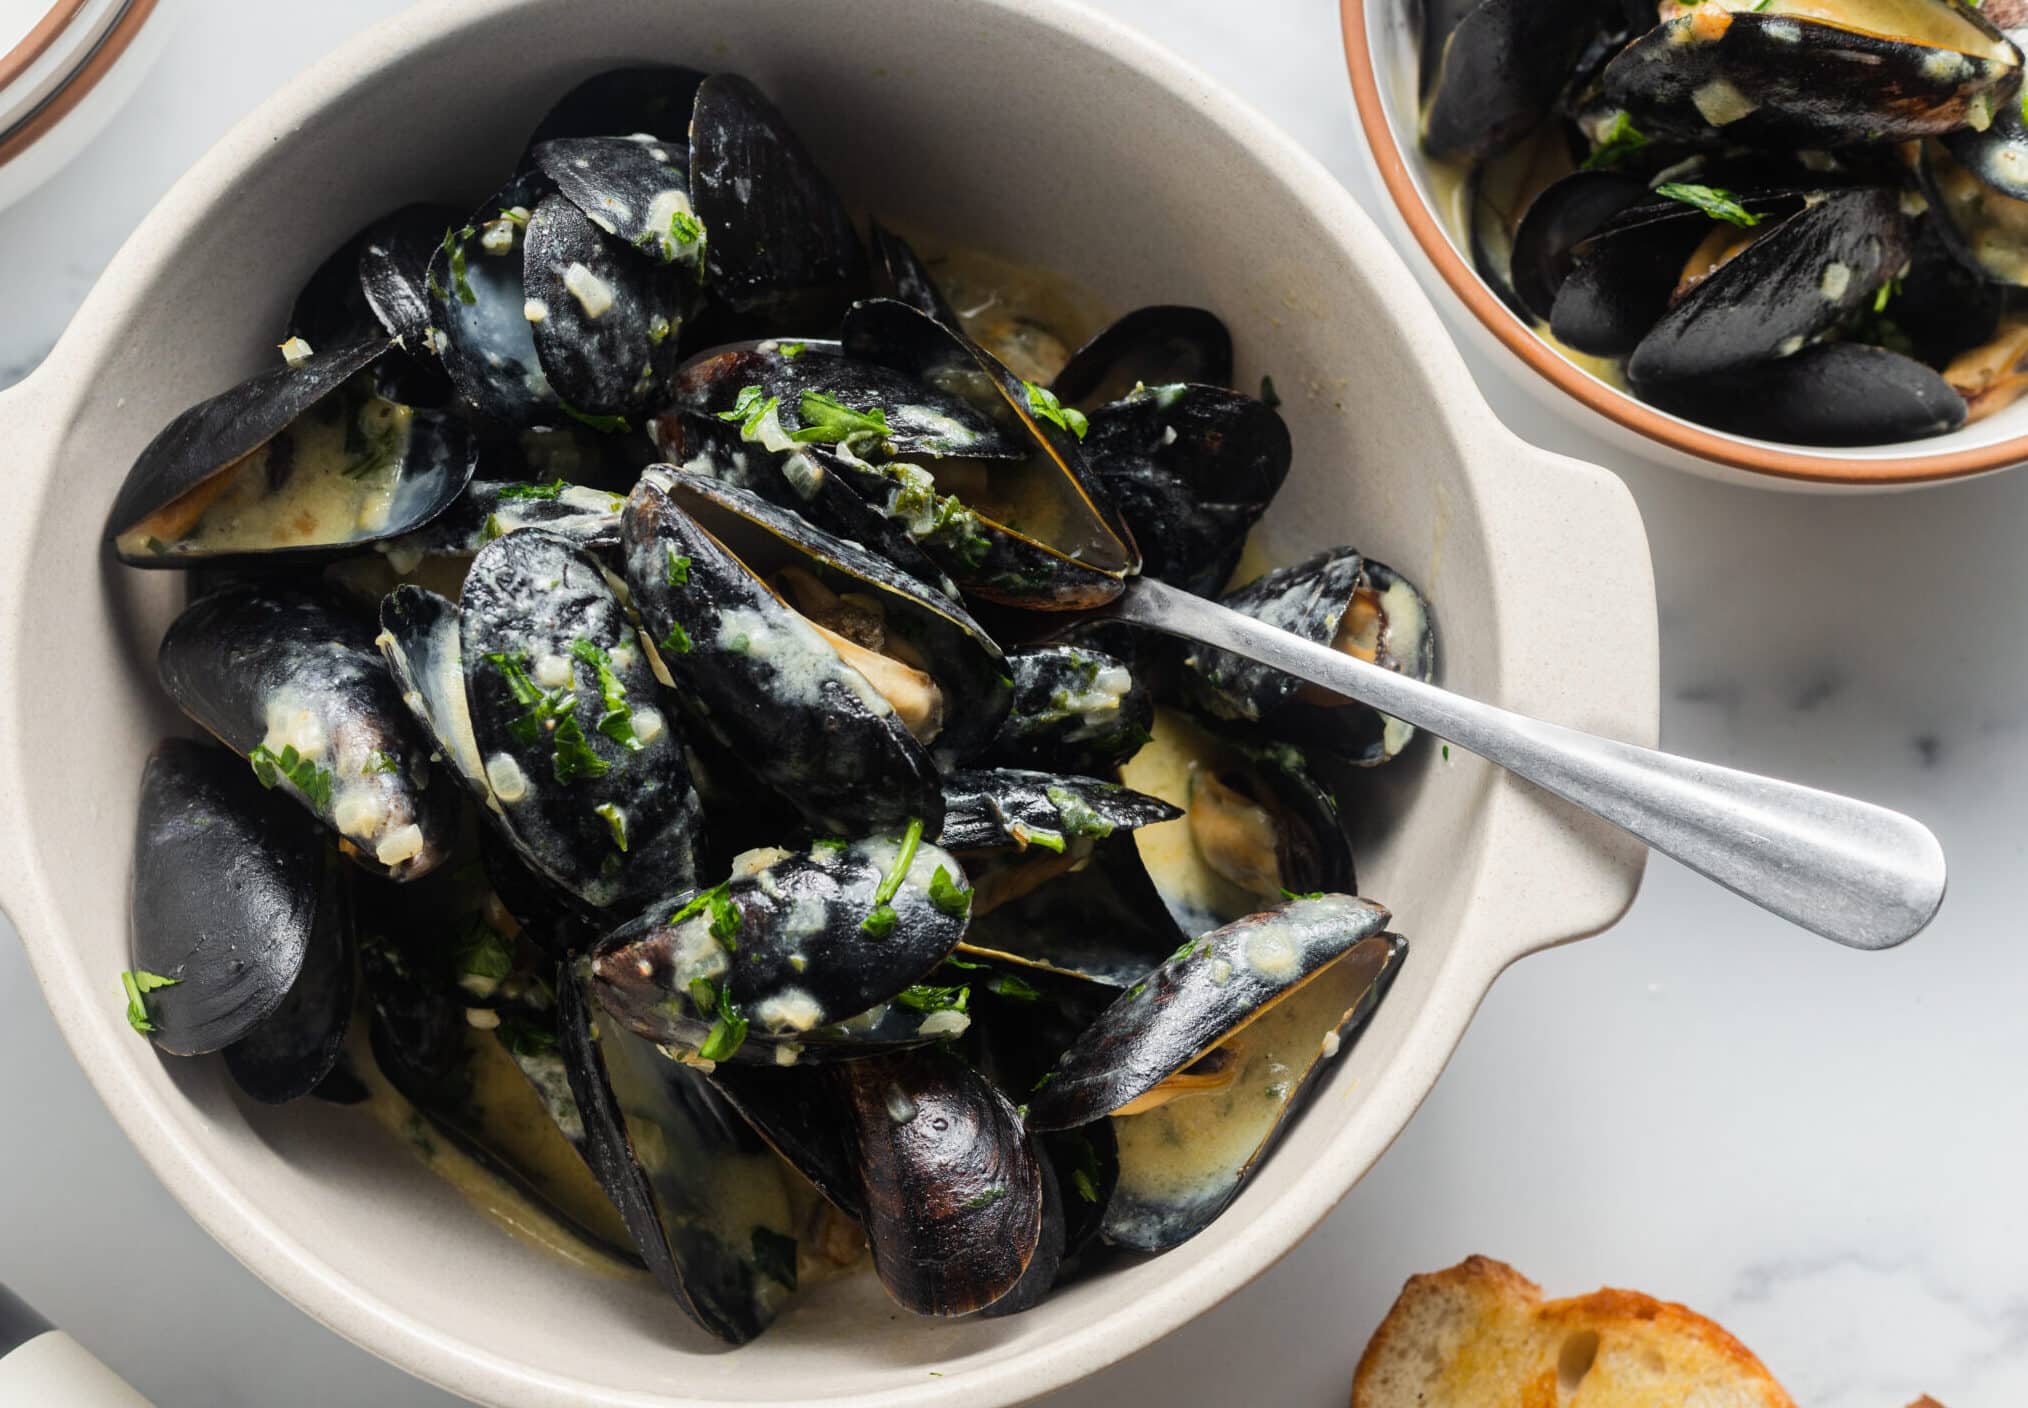 Mussels on cream sauce, garlic, and lemon in a bowl.